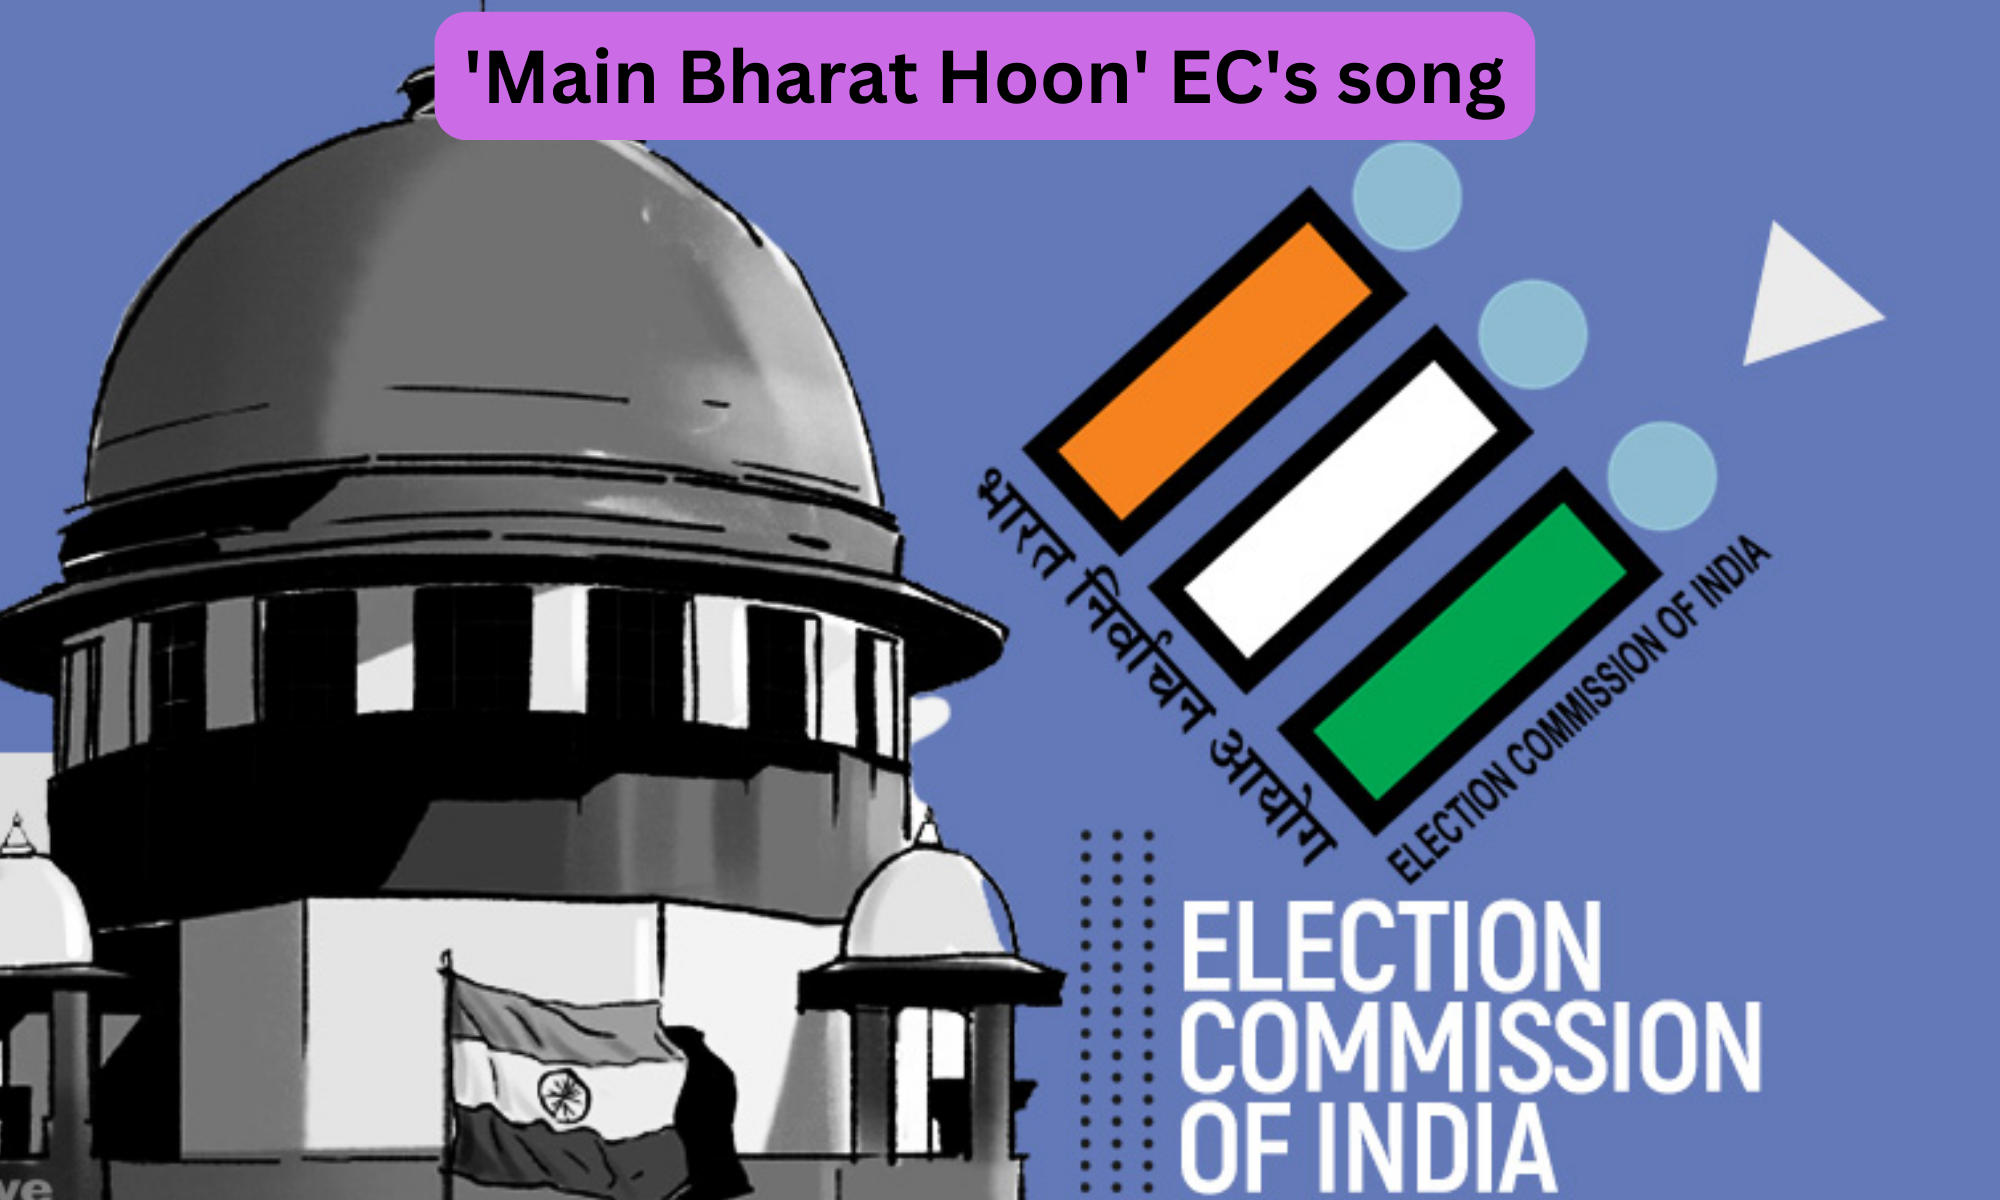 EC's song aims to nudge voters for upcoming polls